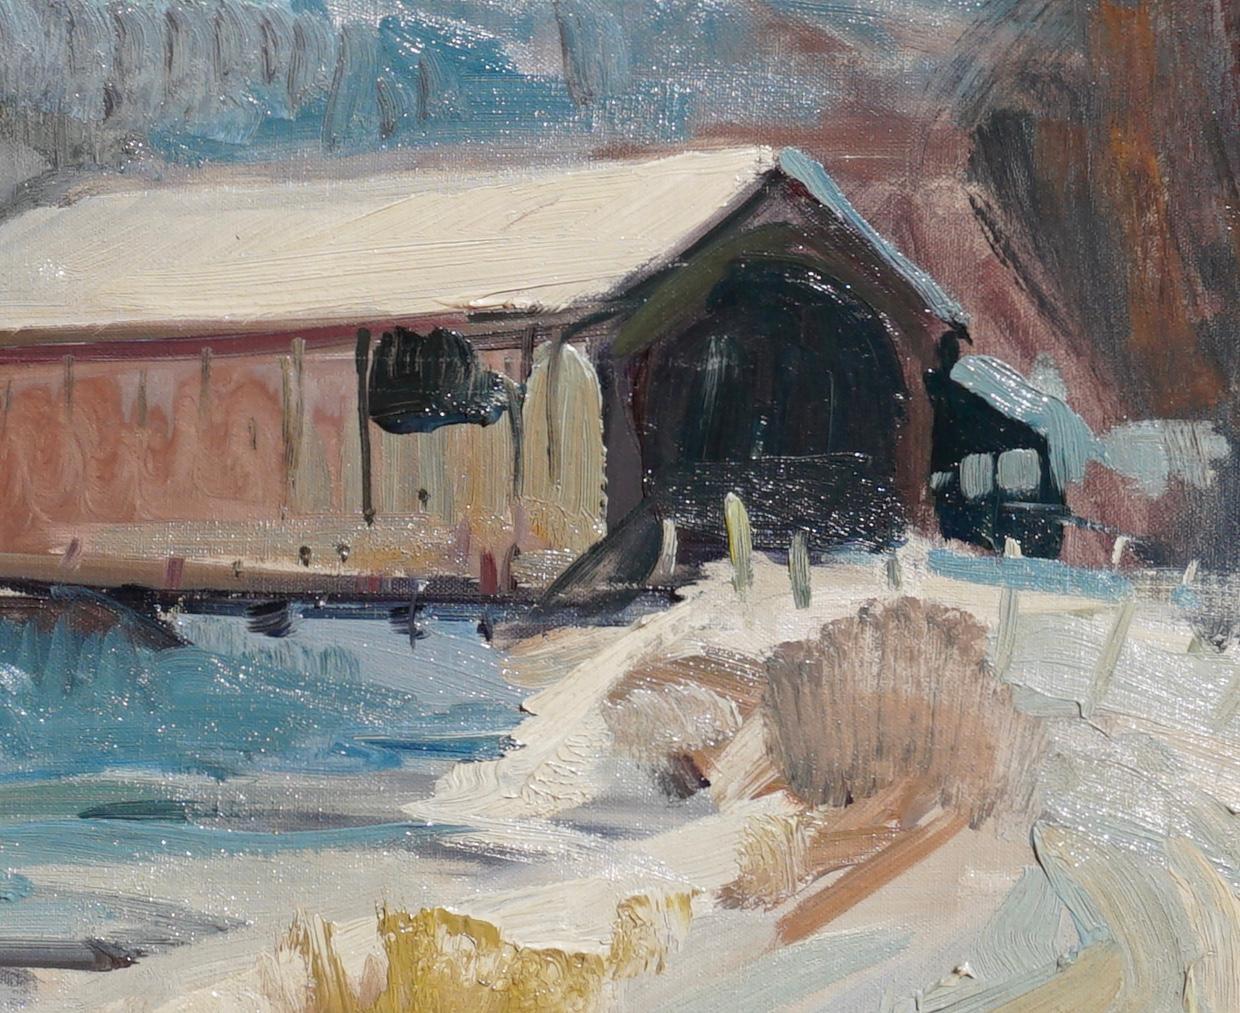 Emile Albert Gruppe 'Mass 1896-1978' “Covered Bridge” Snow Painting For Sale 2